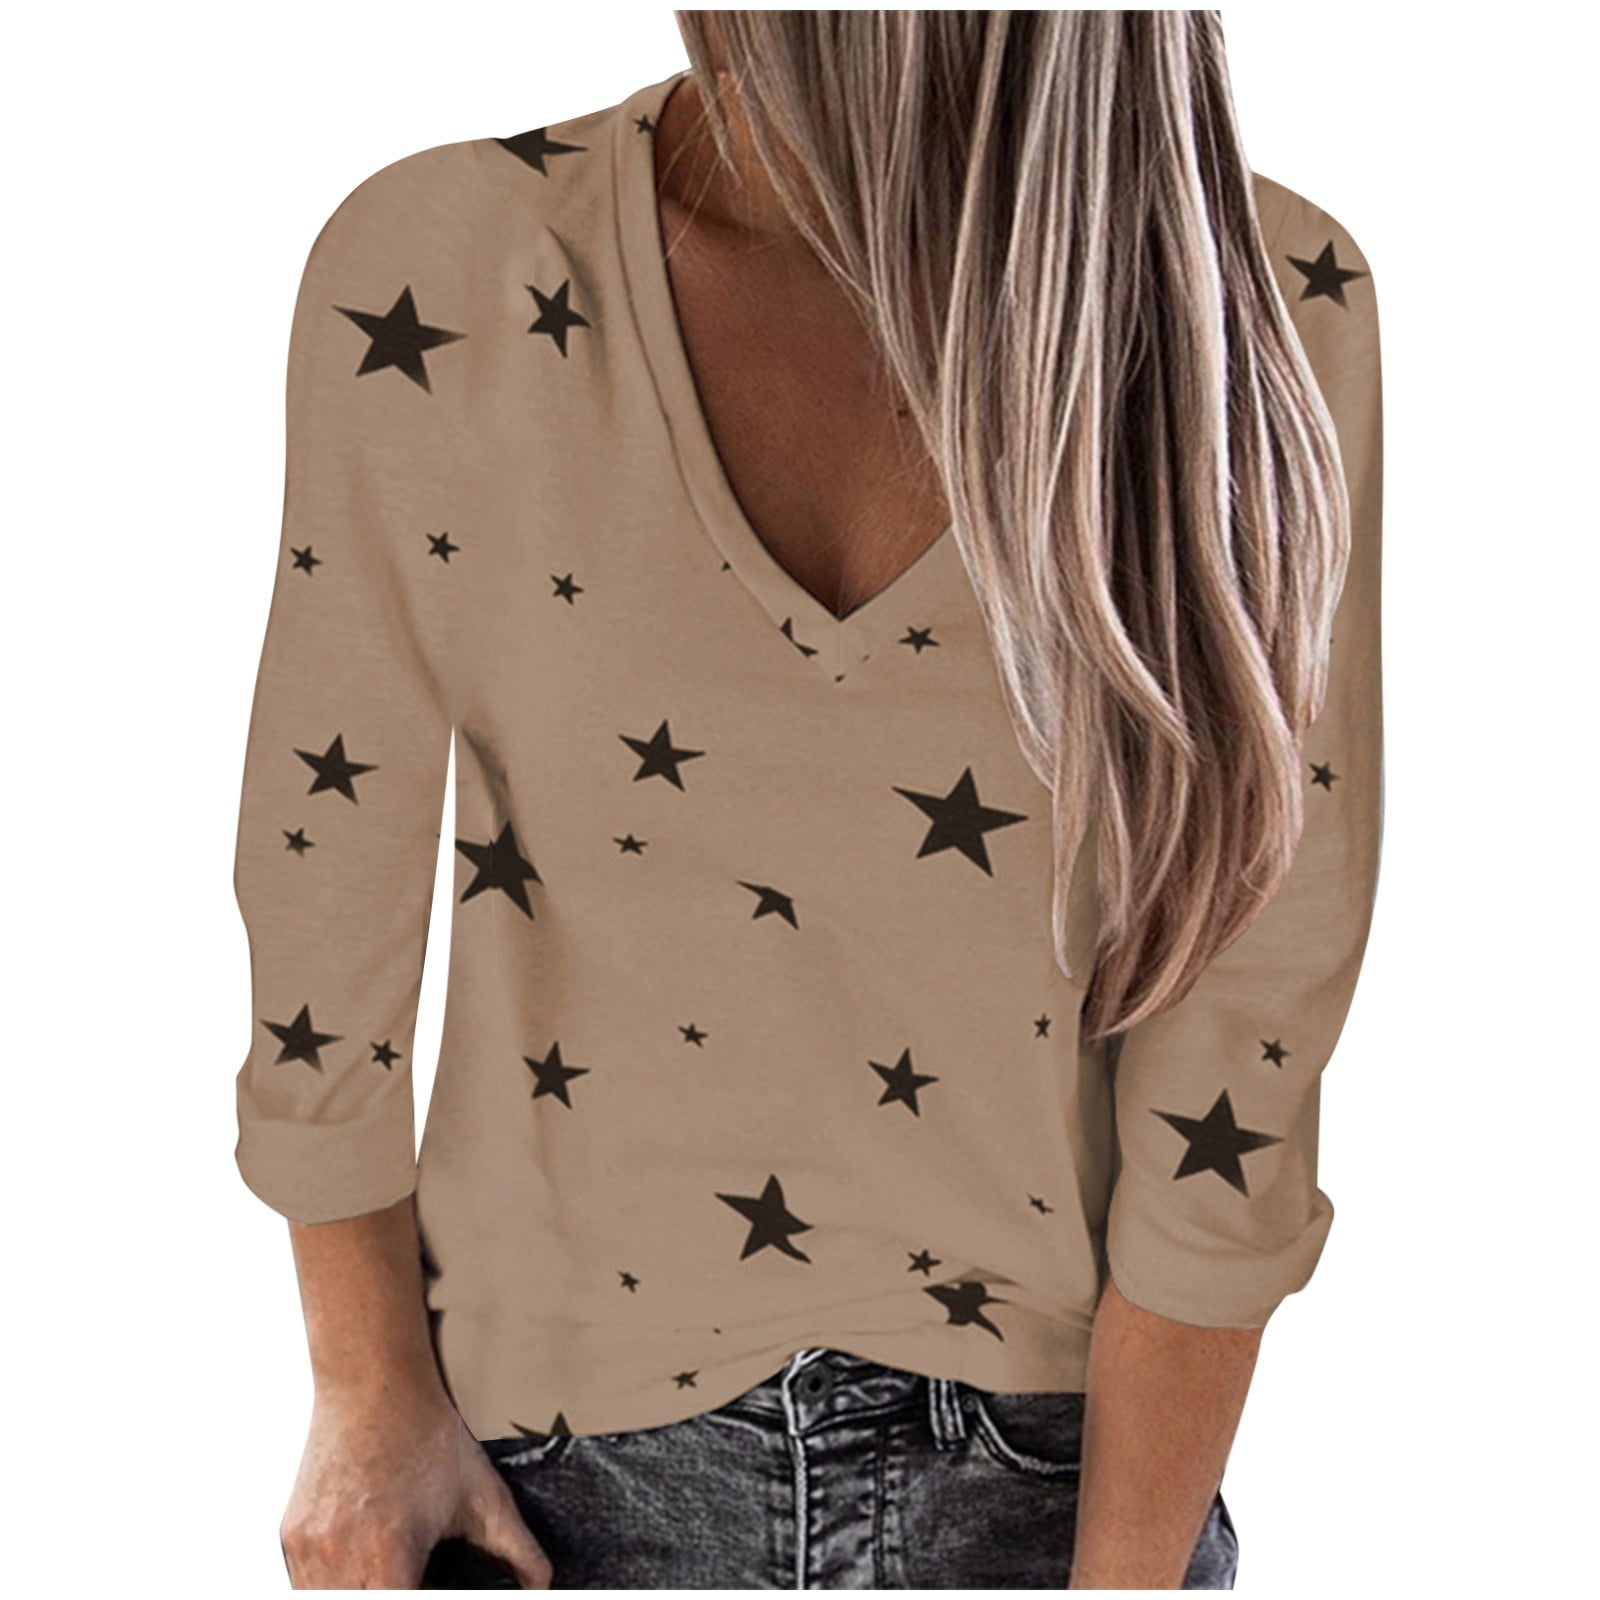  Women Prints Casual V Neck Short Sleeved A,0.01 Cent Items only,1  Dollar Stuff,Outlet Today Clearance Women,Items Under 3 Dollars,Clearance  Womens Tunic : Clothing, Shoes & Jewelry